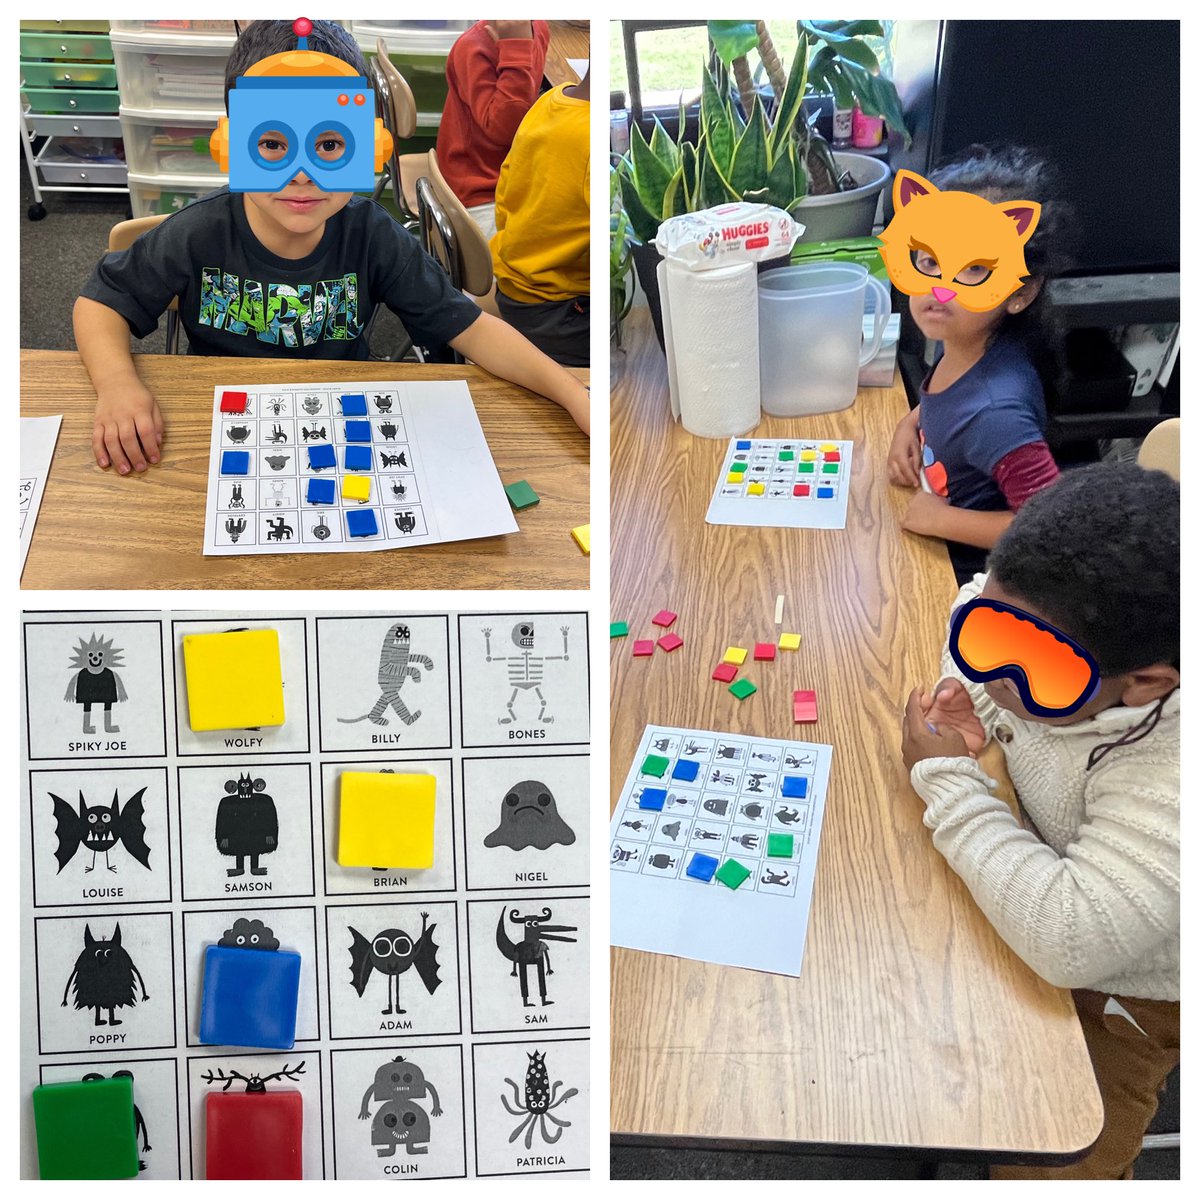 Monster & witch stories w/Kinder ELs, plus listening practice w/a directed 🦇 draw on @ArtforKidsHub. Oh, & their favorite thing so far? Using describing words to play Scary Bingo & find the right monsters! @rafael_segarra @EdEmberley @TheRealGruffalo @LaurenceKingPub 👹 🧹🧙‍♀️🦇